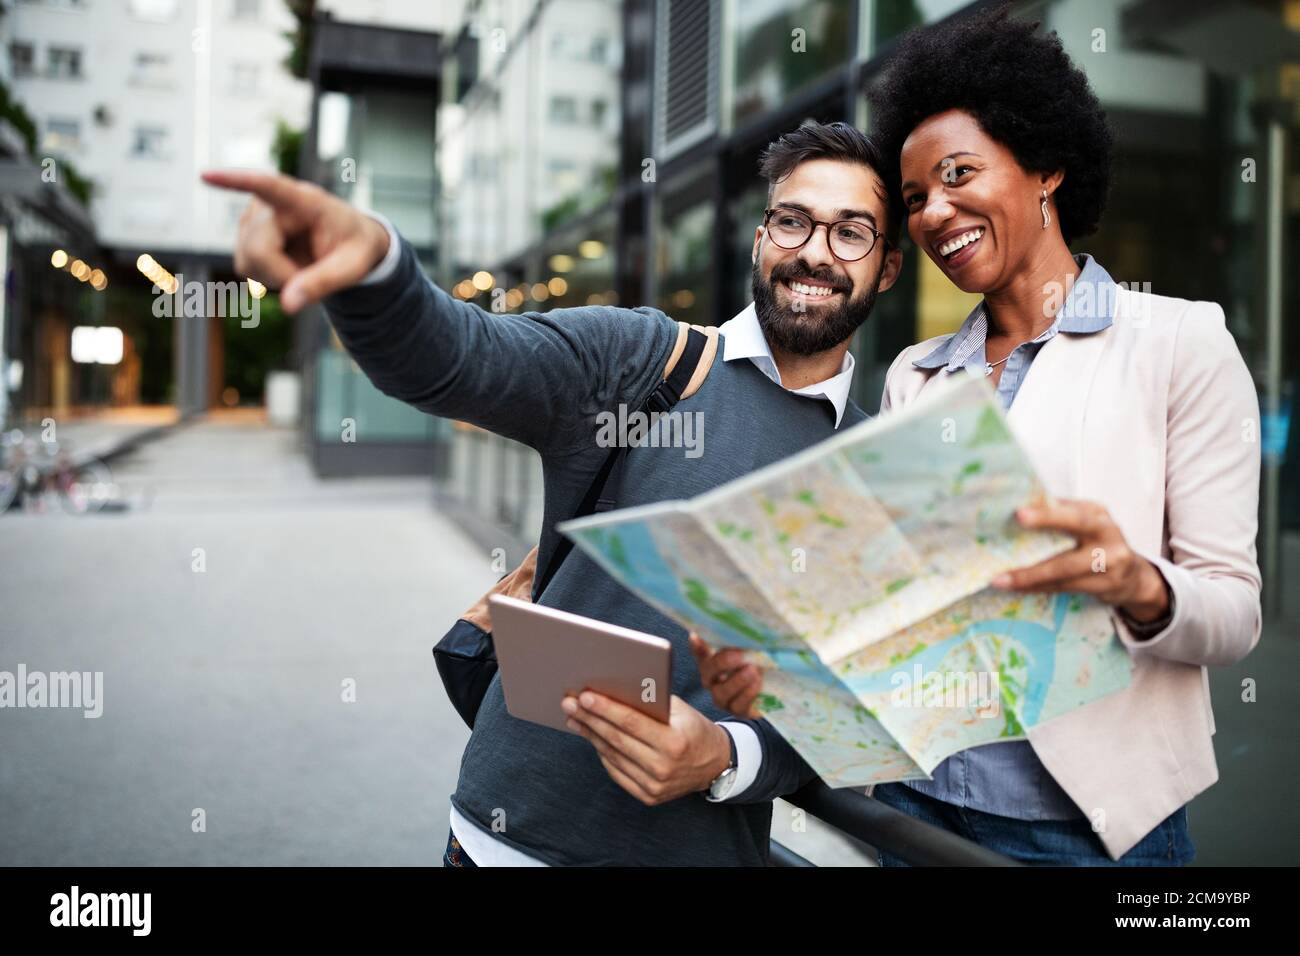 Lost happy couple in the city holding a map. Travel, tourism, people concept Stock Photo